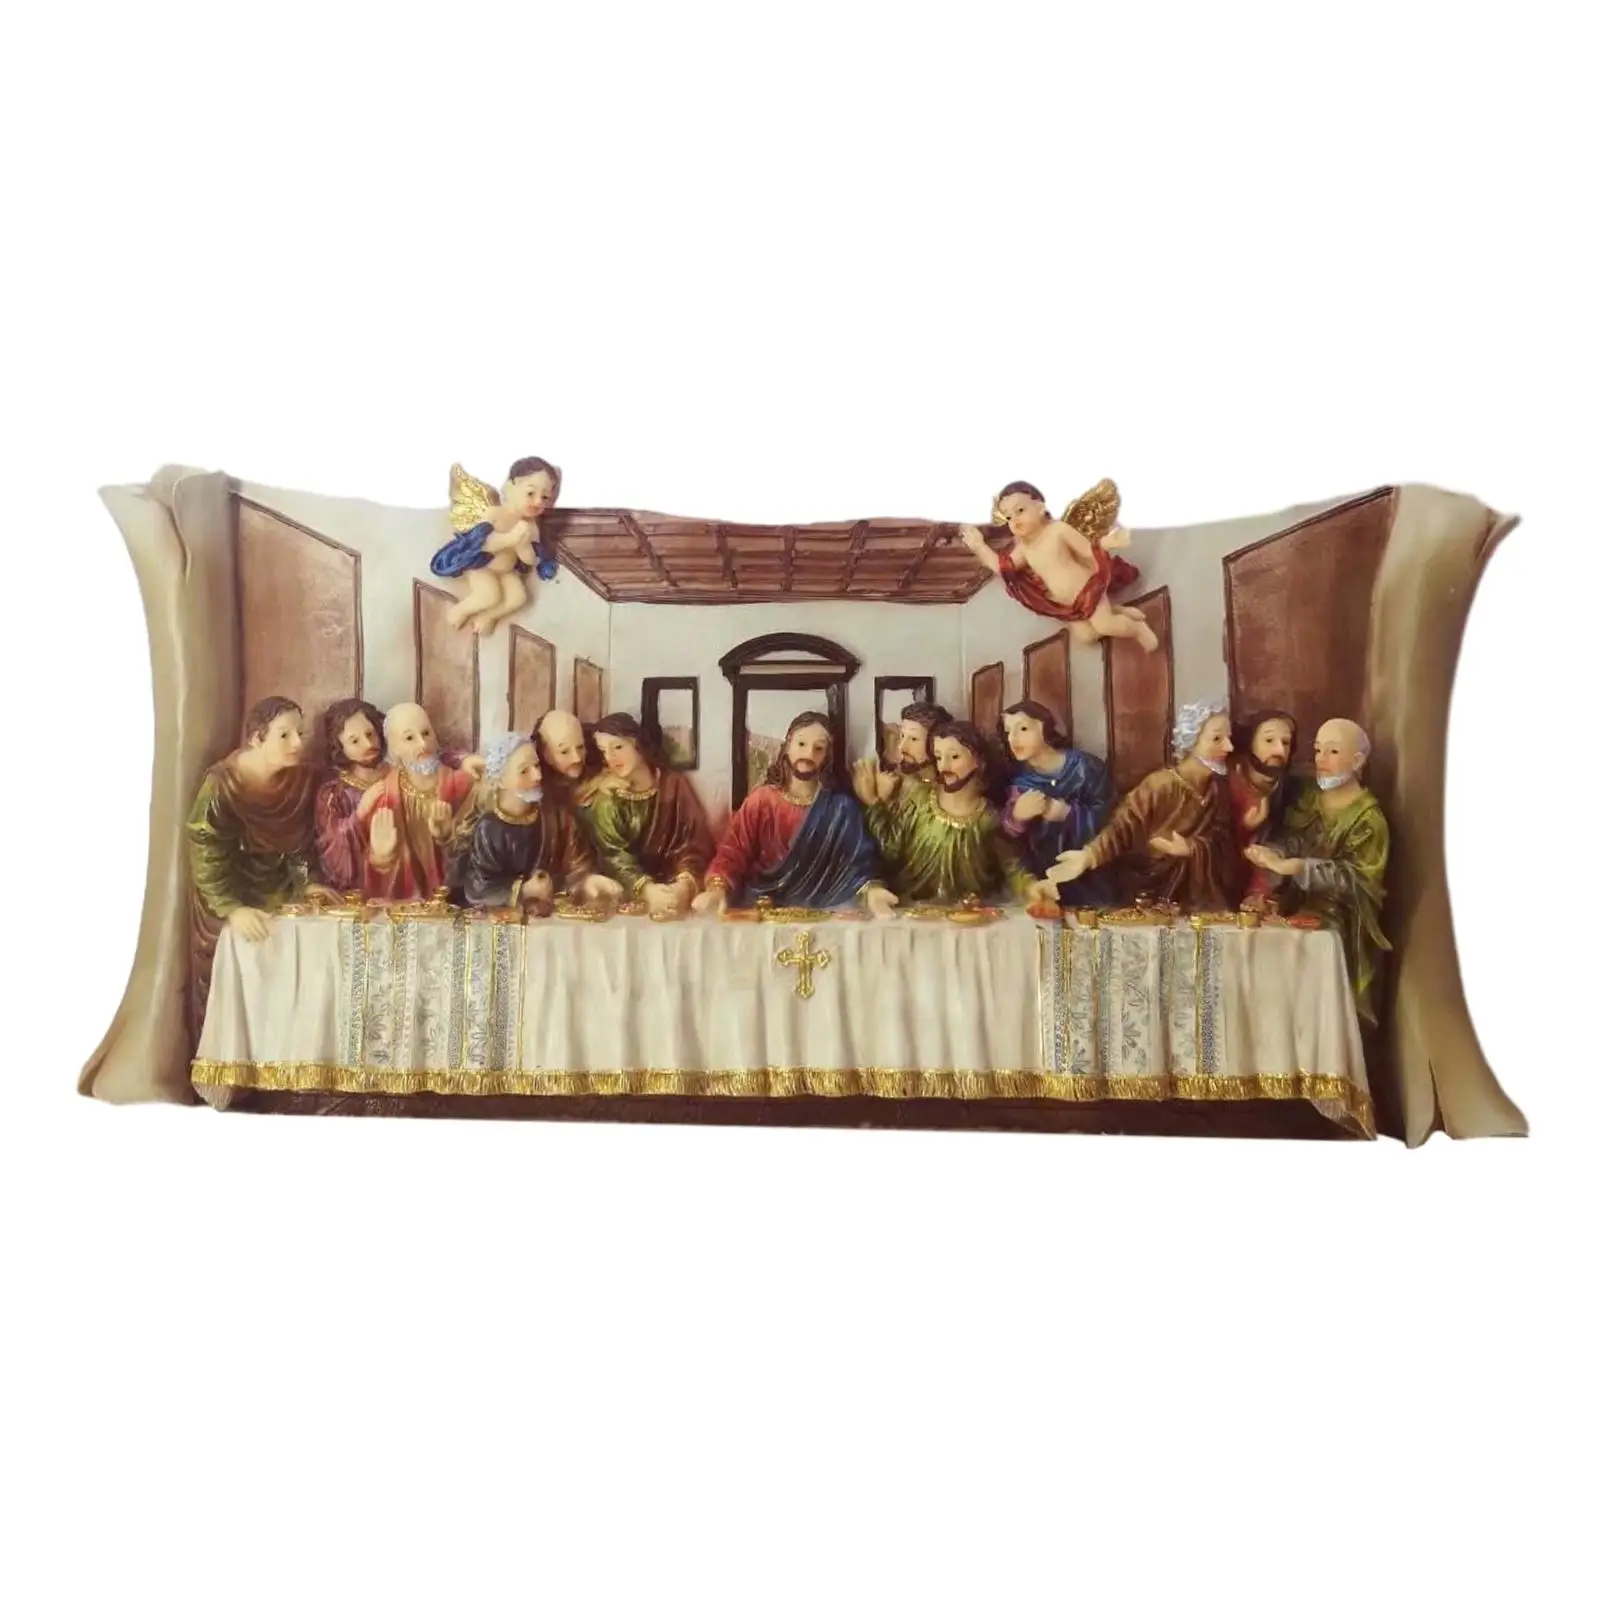 Resin Last Supper Sculpture Statue Artwork Christian Catholic Figurine Crafts Religious Statue for Home Bedroom Office Decor